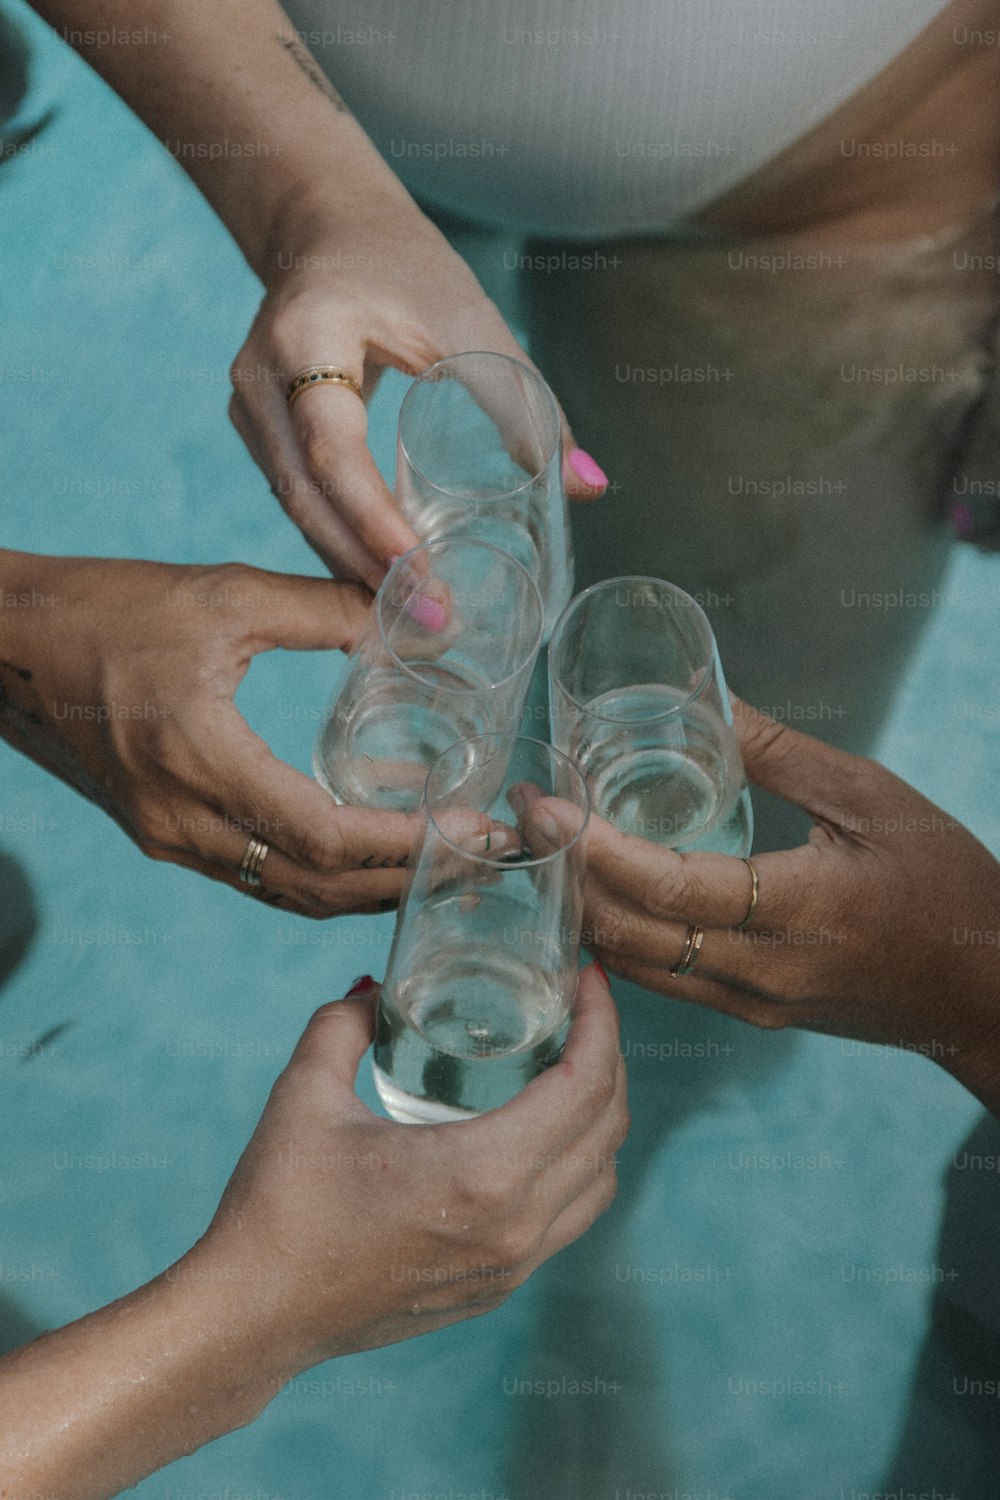 a group of people holding wine glasses in their hands